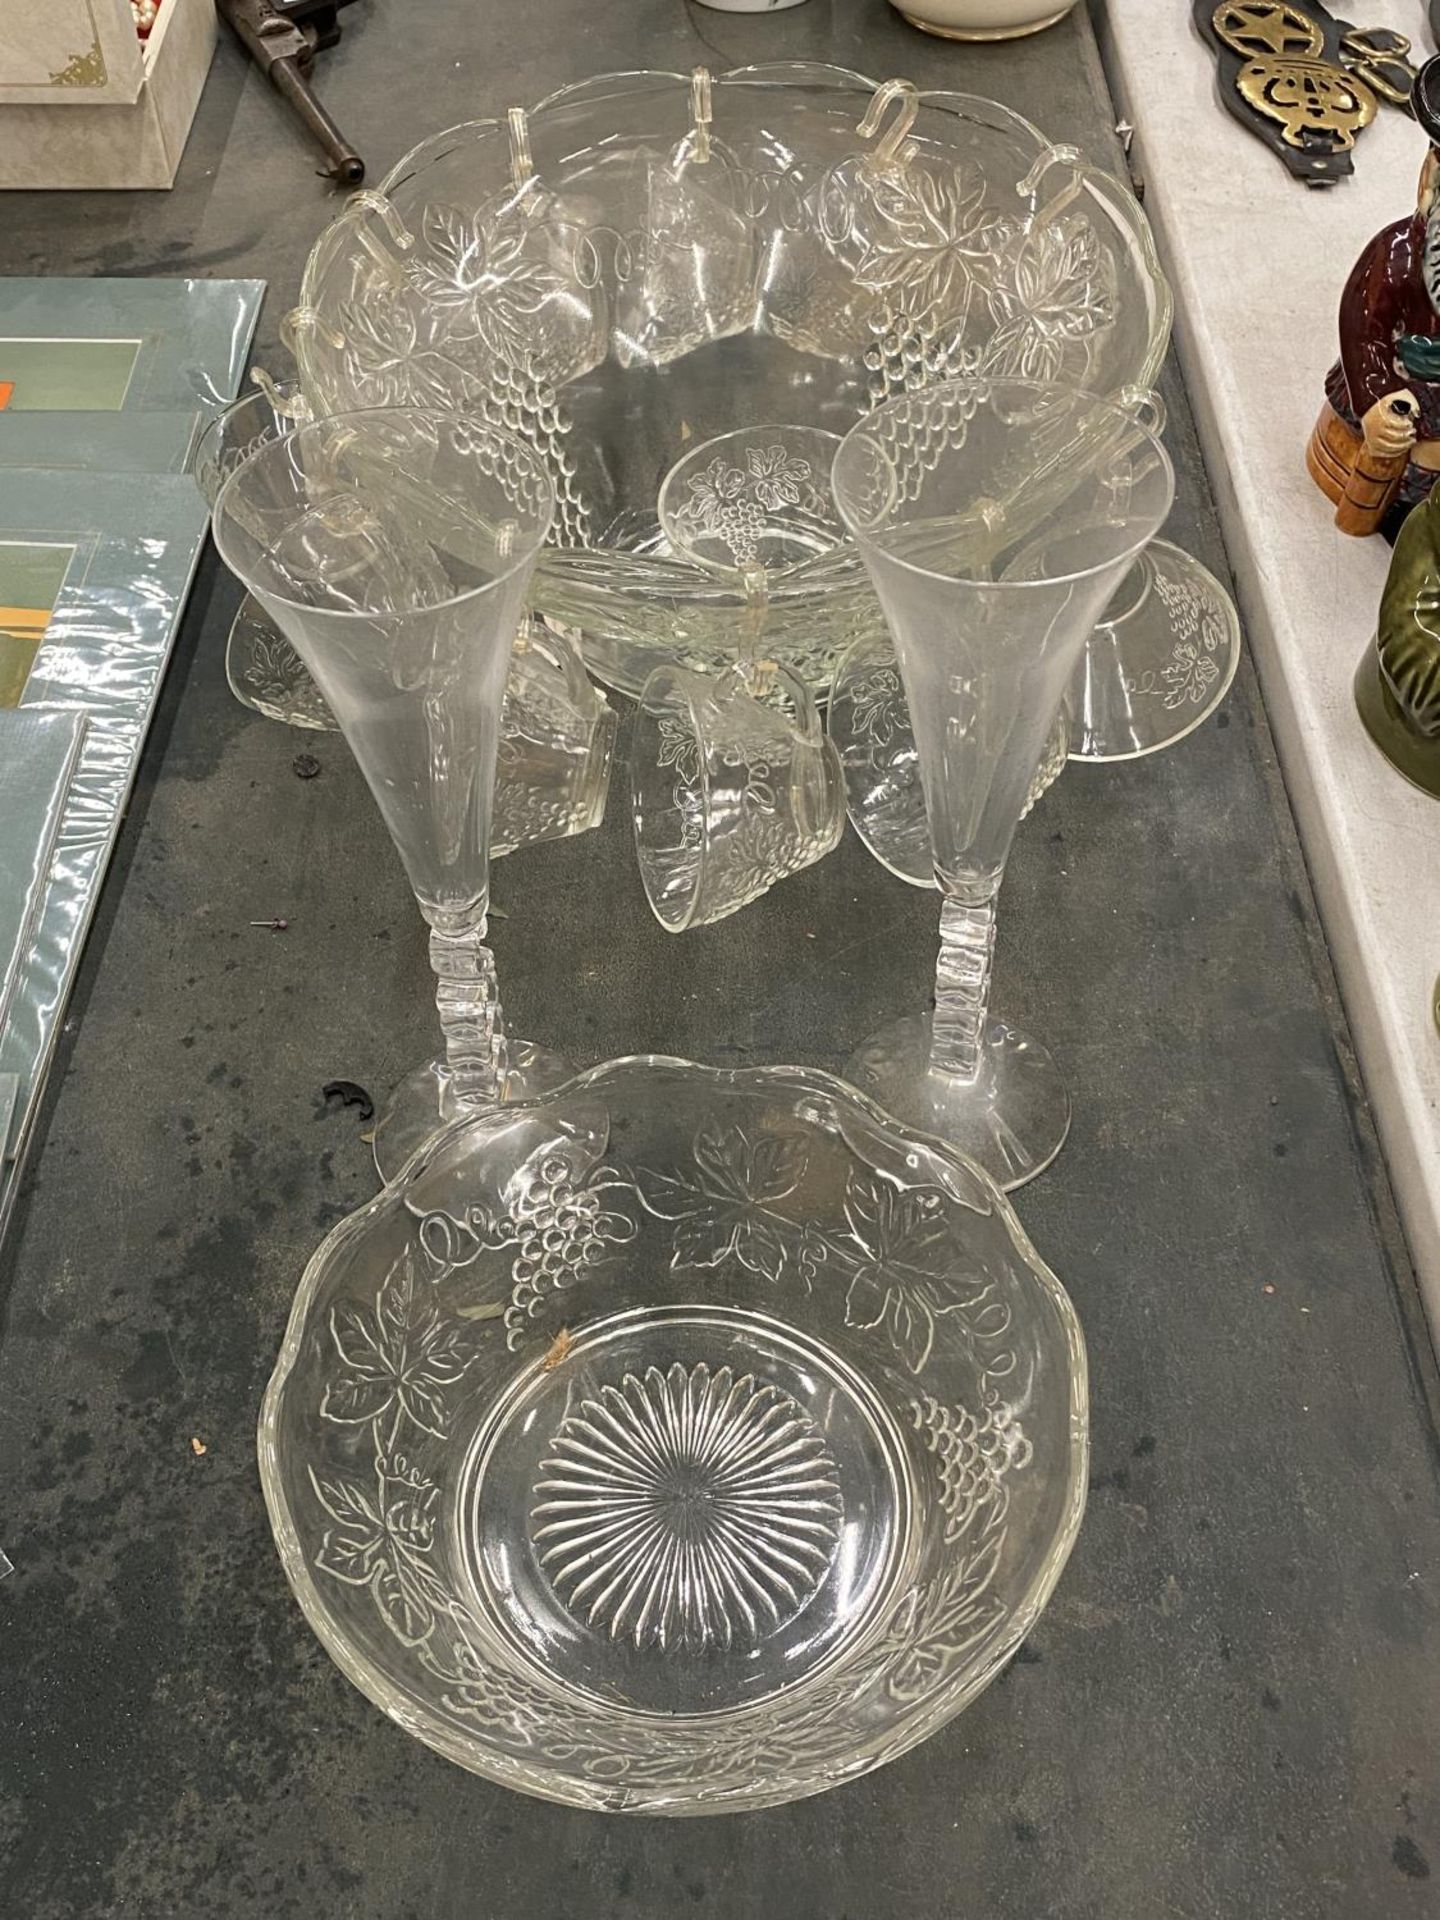 A GLASS PUNCH BOWL WITH CUPS DECORATED WITH GRAPES, TWO CHAMPAGNE FLUTES, ETC